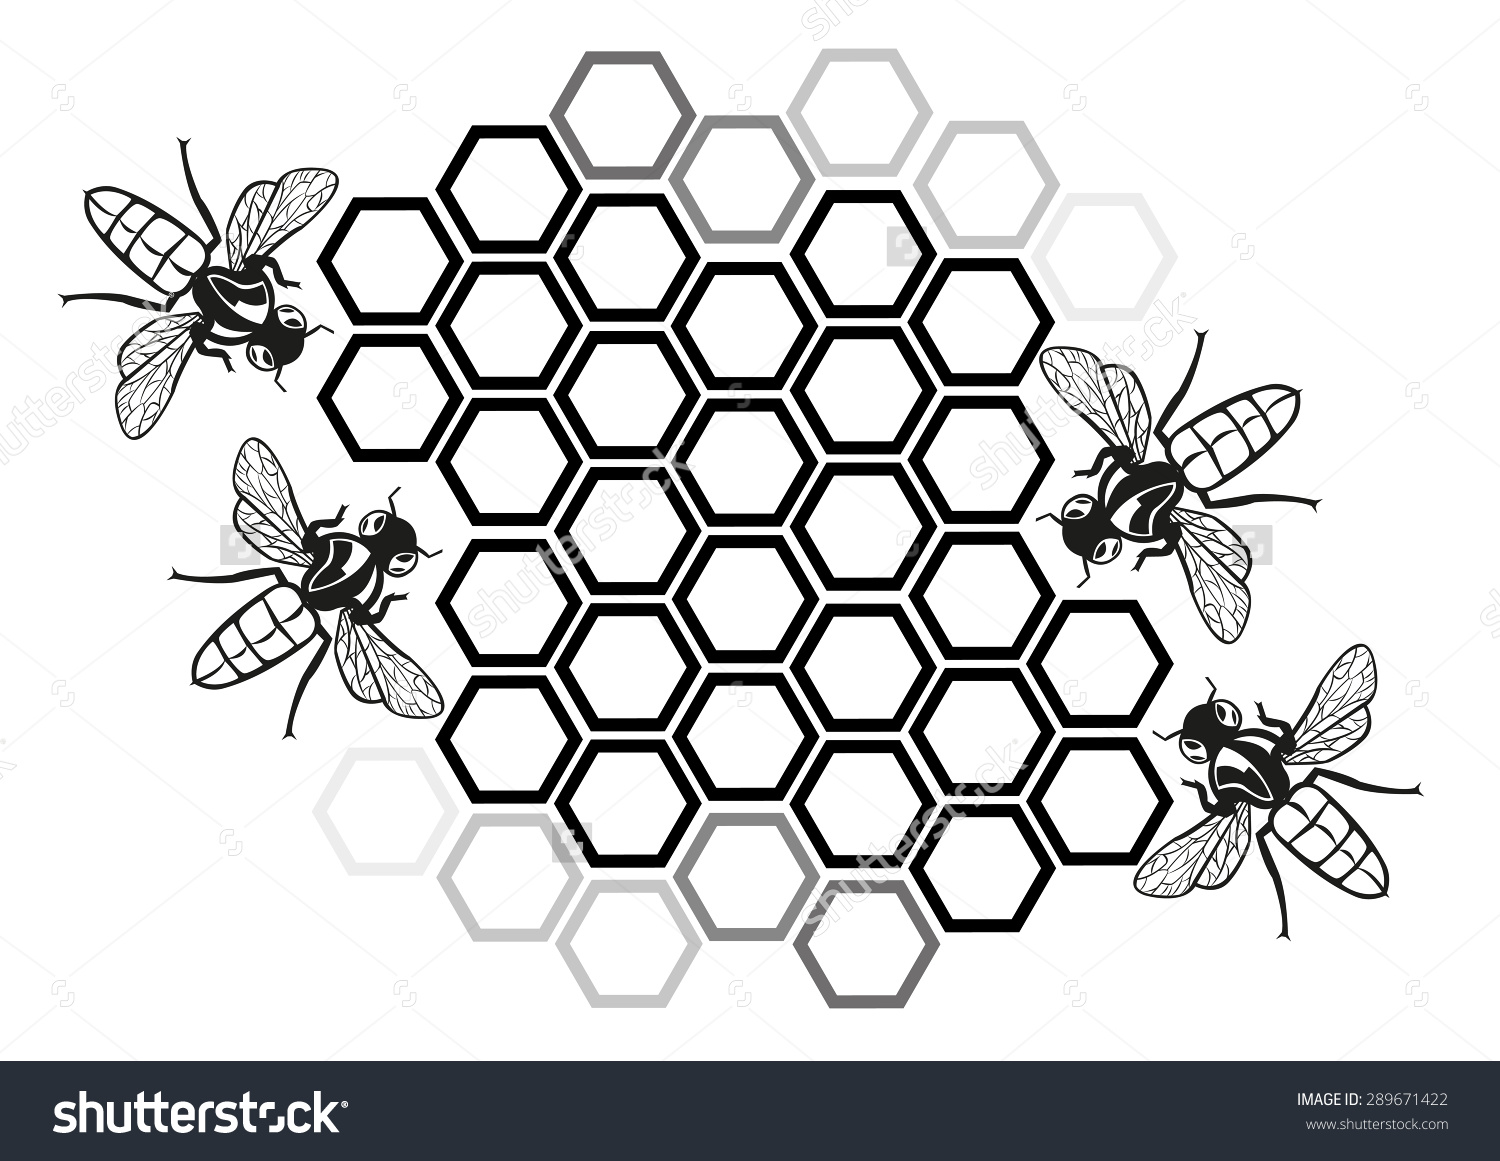 honeycomb-formation-clipart-18.jpg